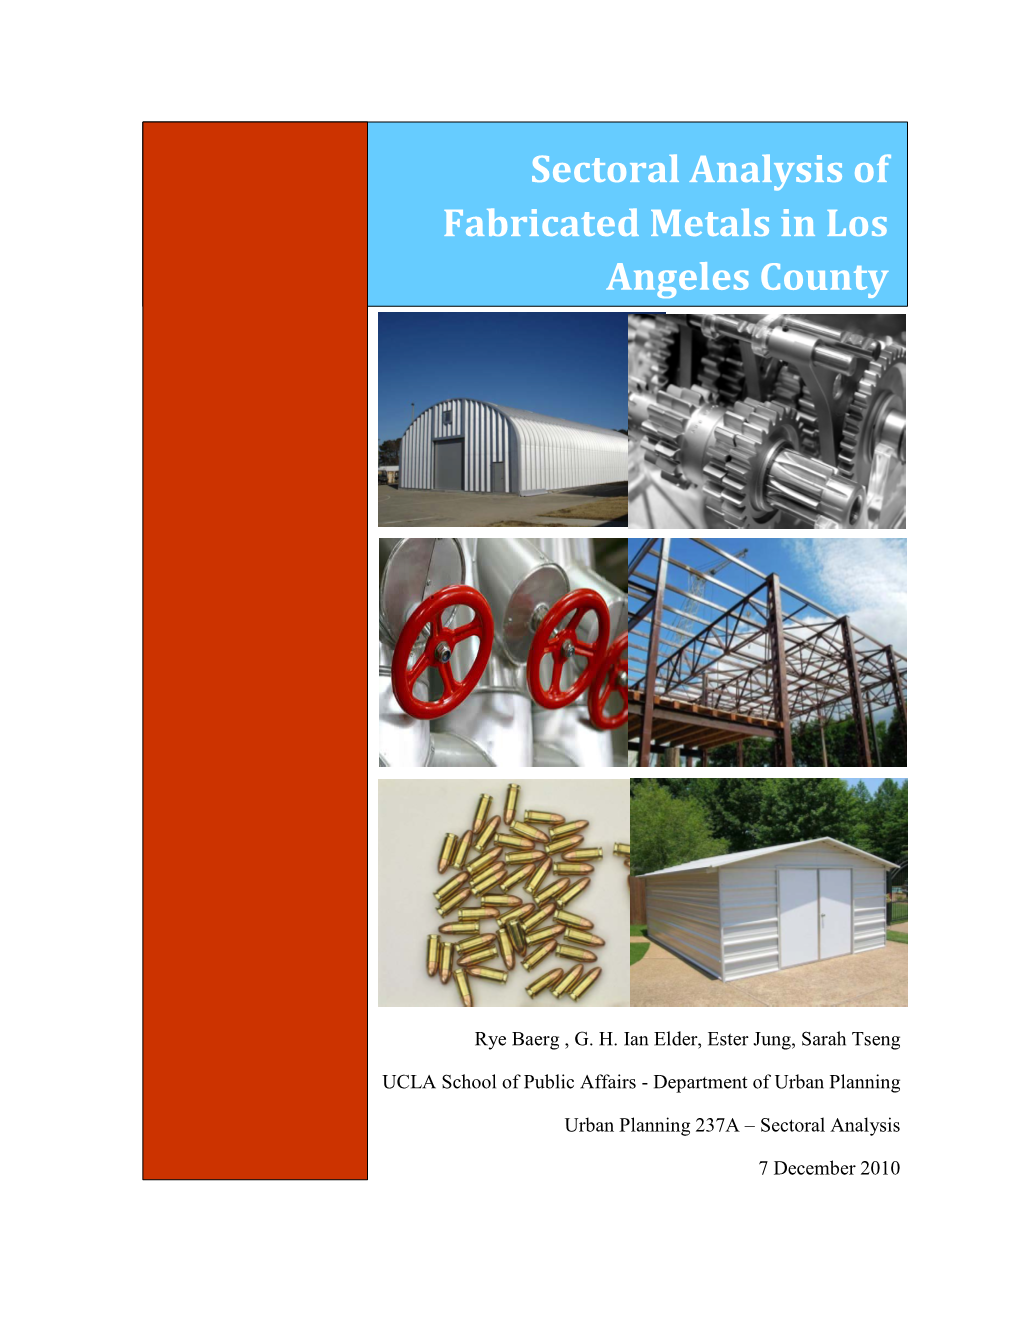 Sectoral Analysis of Fabricated Metals in Los Angeles County